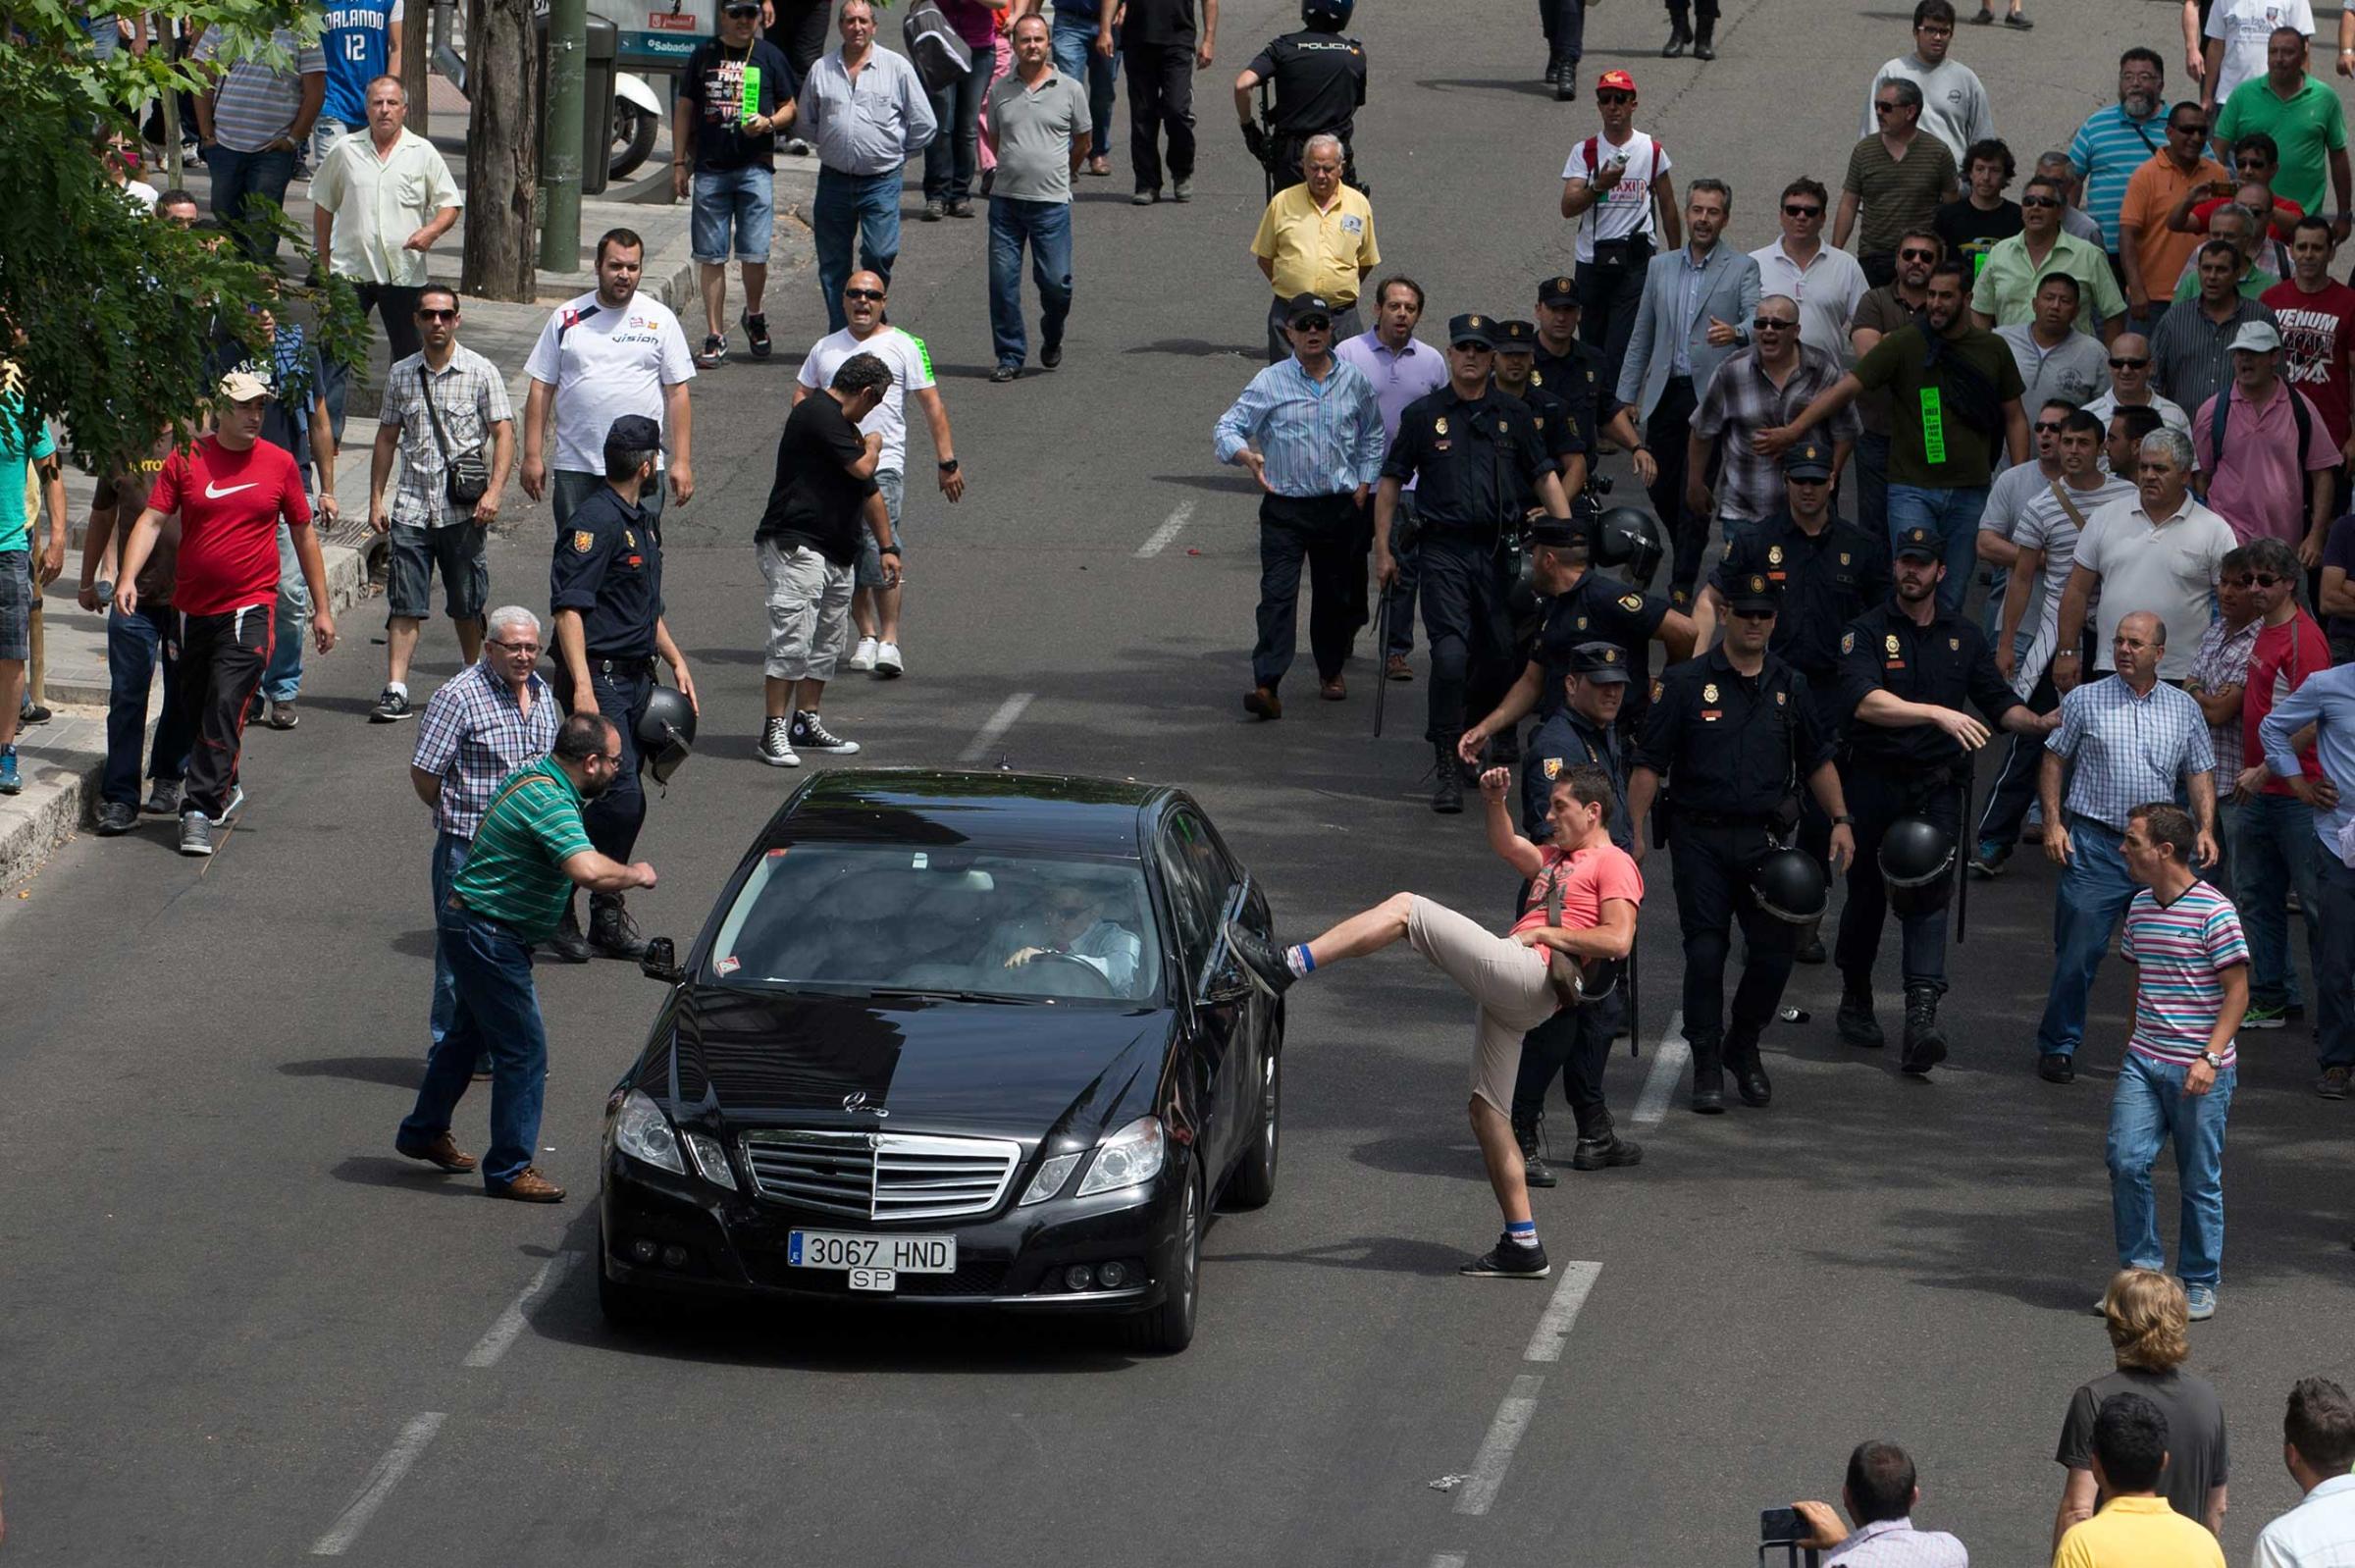 A demonstrator kicks a car, suspected of being a private taxi during a 24 hour taxi strike and protest in Madrid on June 11, 2014.